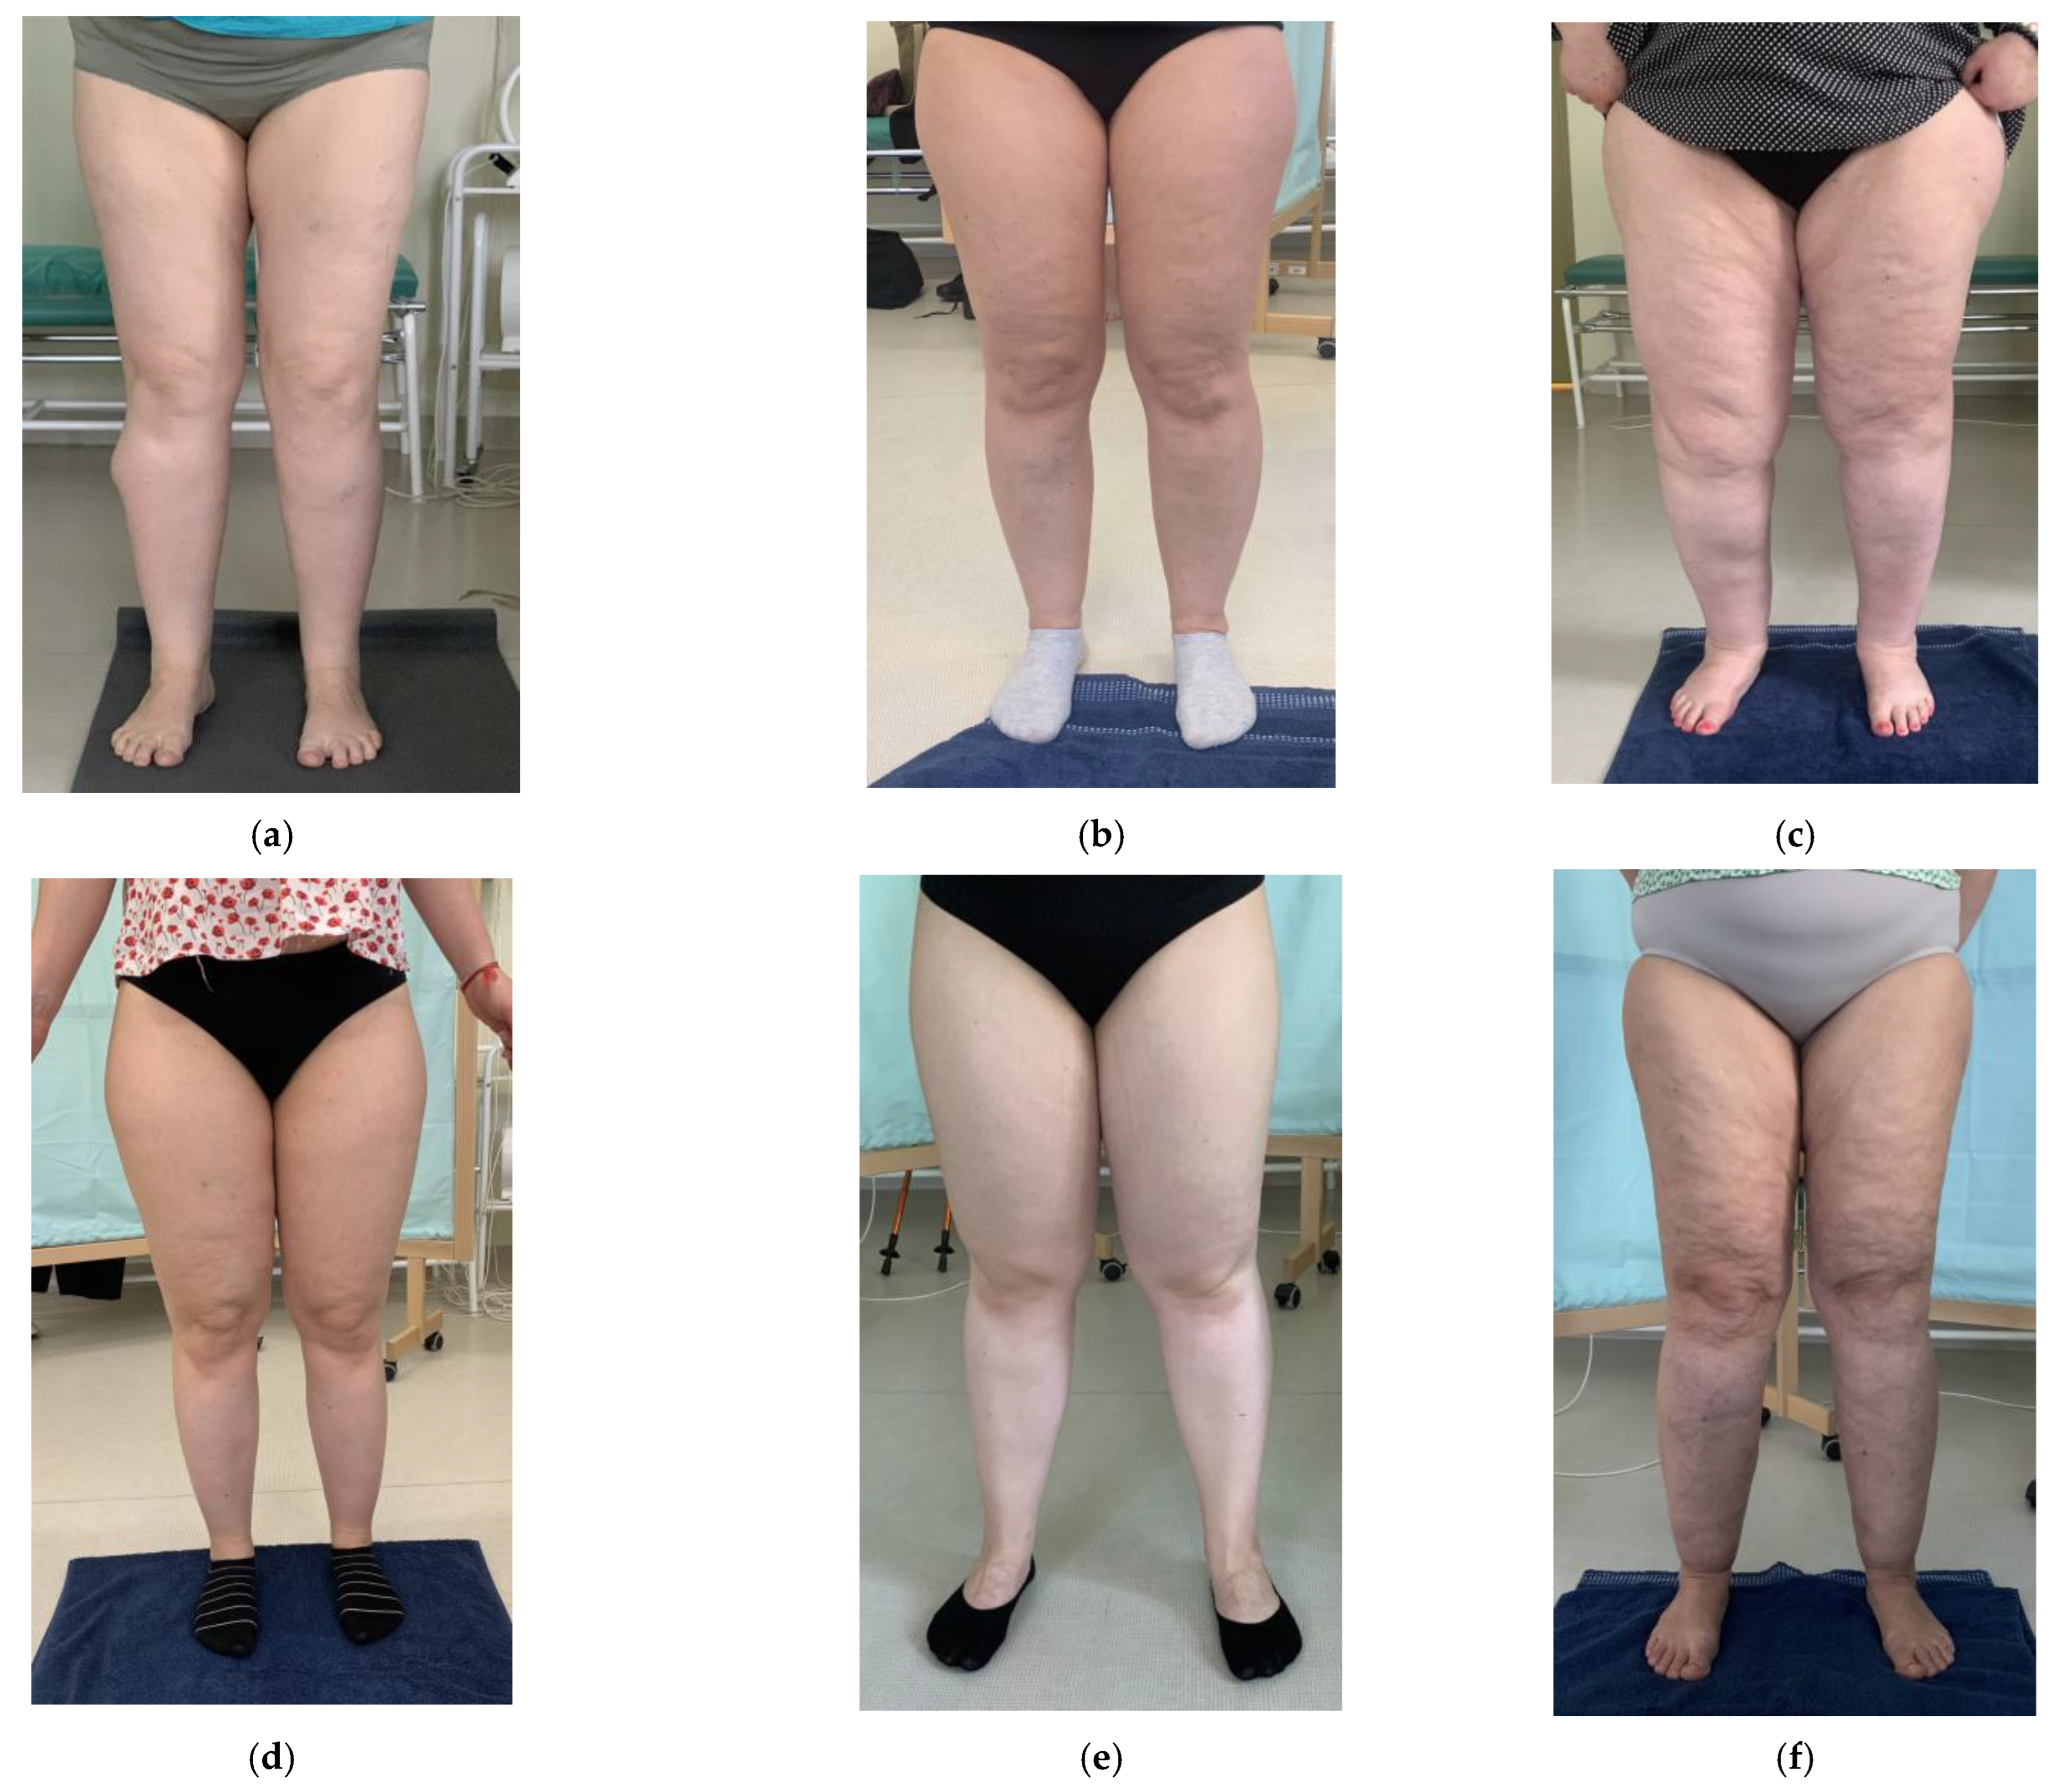 ARE FAT LEGS AT PUBERTY AN EARLY SIGN OF LIPEDEMA? - Total